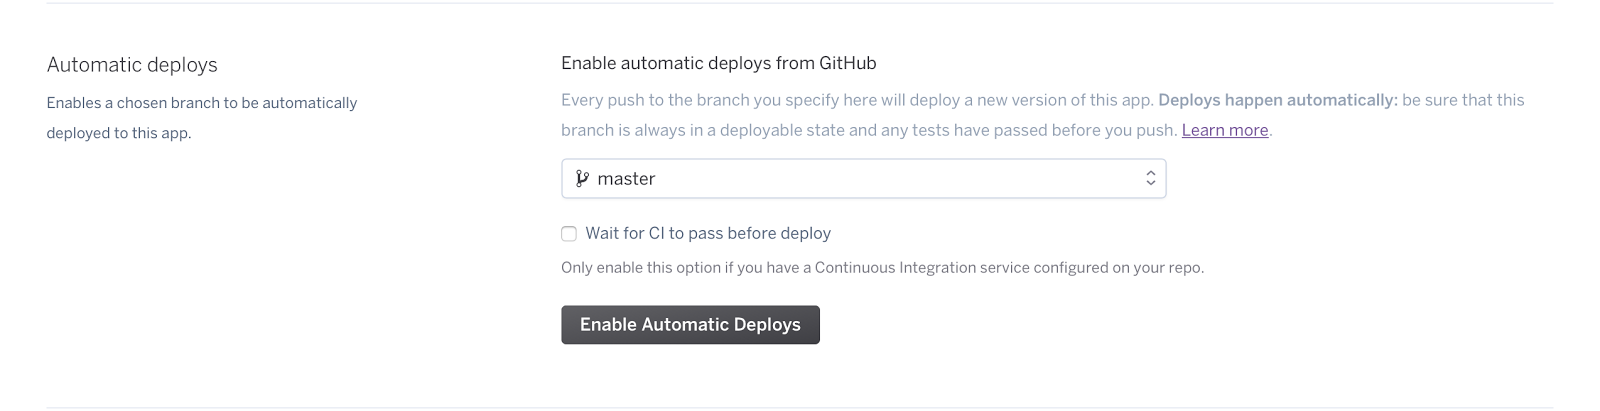 Enable automatic deploys button in Heroku